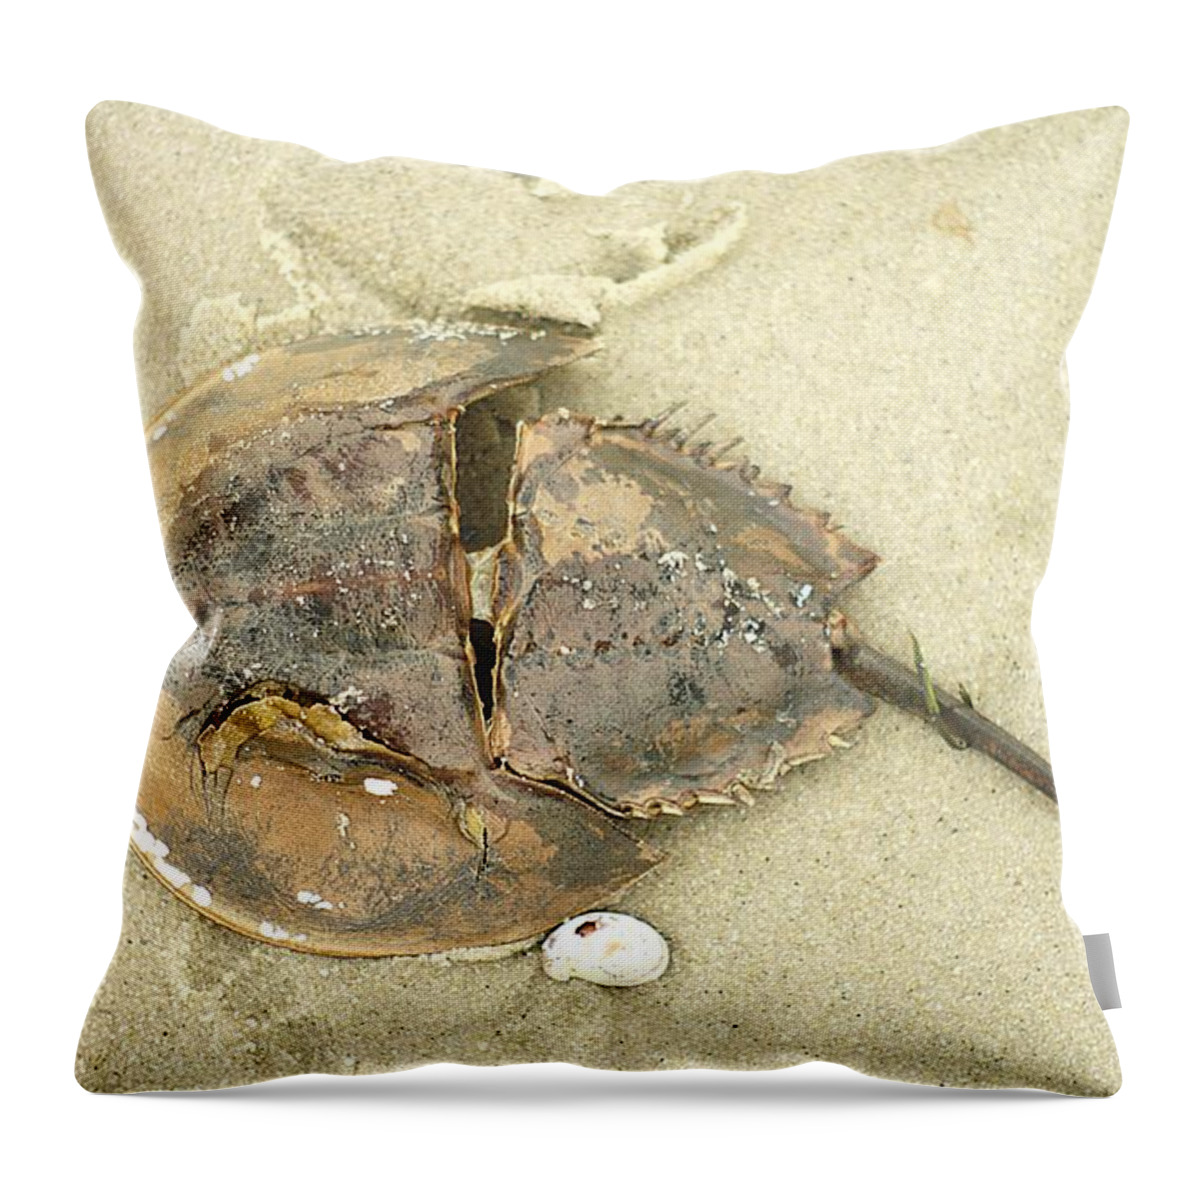 Horseshoe Crab Throw Pillow featuring the photograph Horseshoe Crab on the Beach by Suzanne Powers